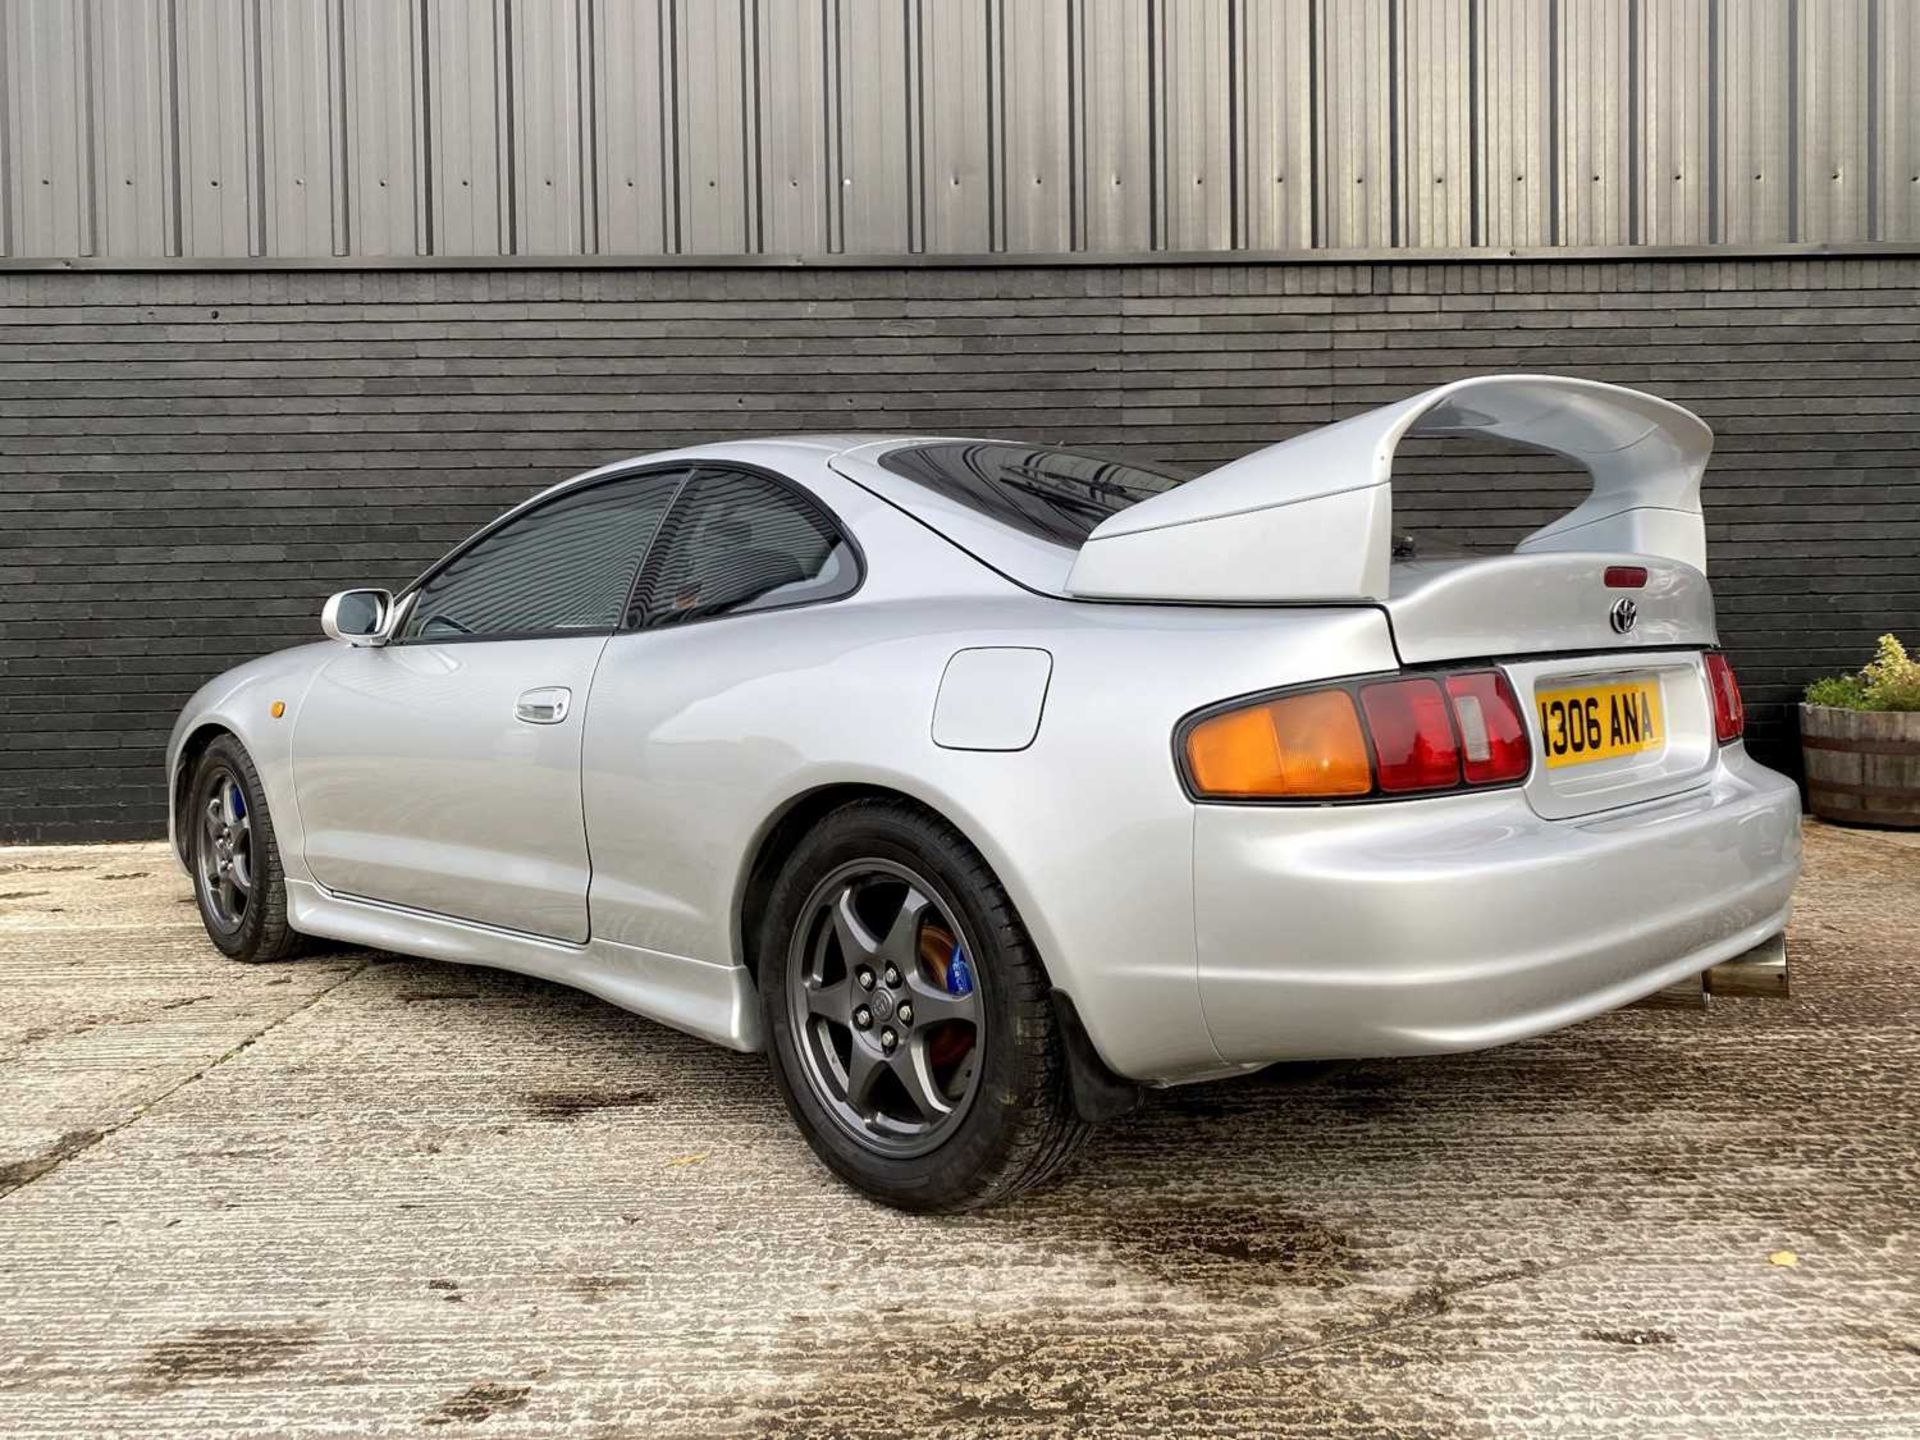 1996 Toyota Celica GT4 ST205 - Image 14 of 65